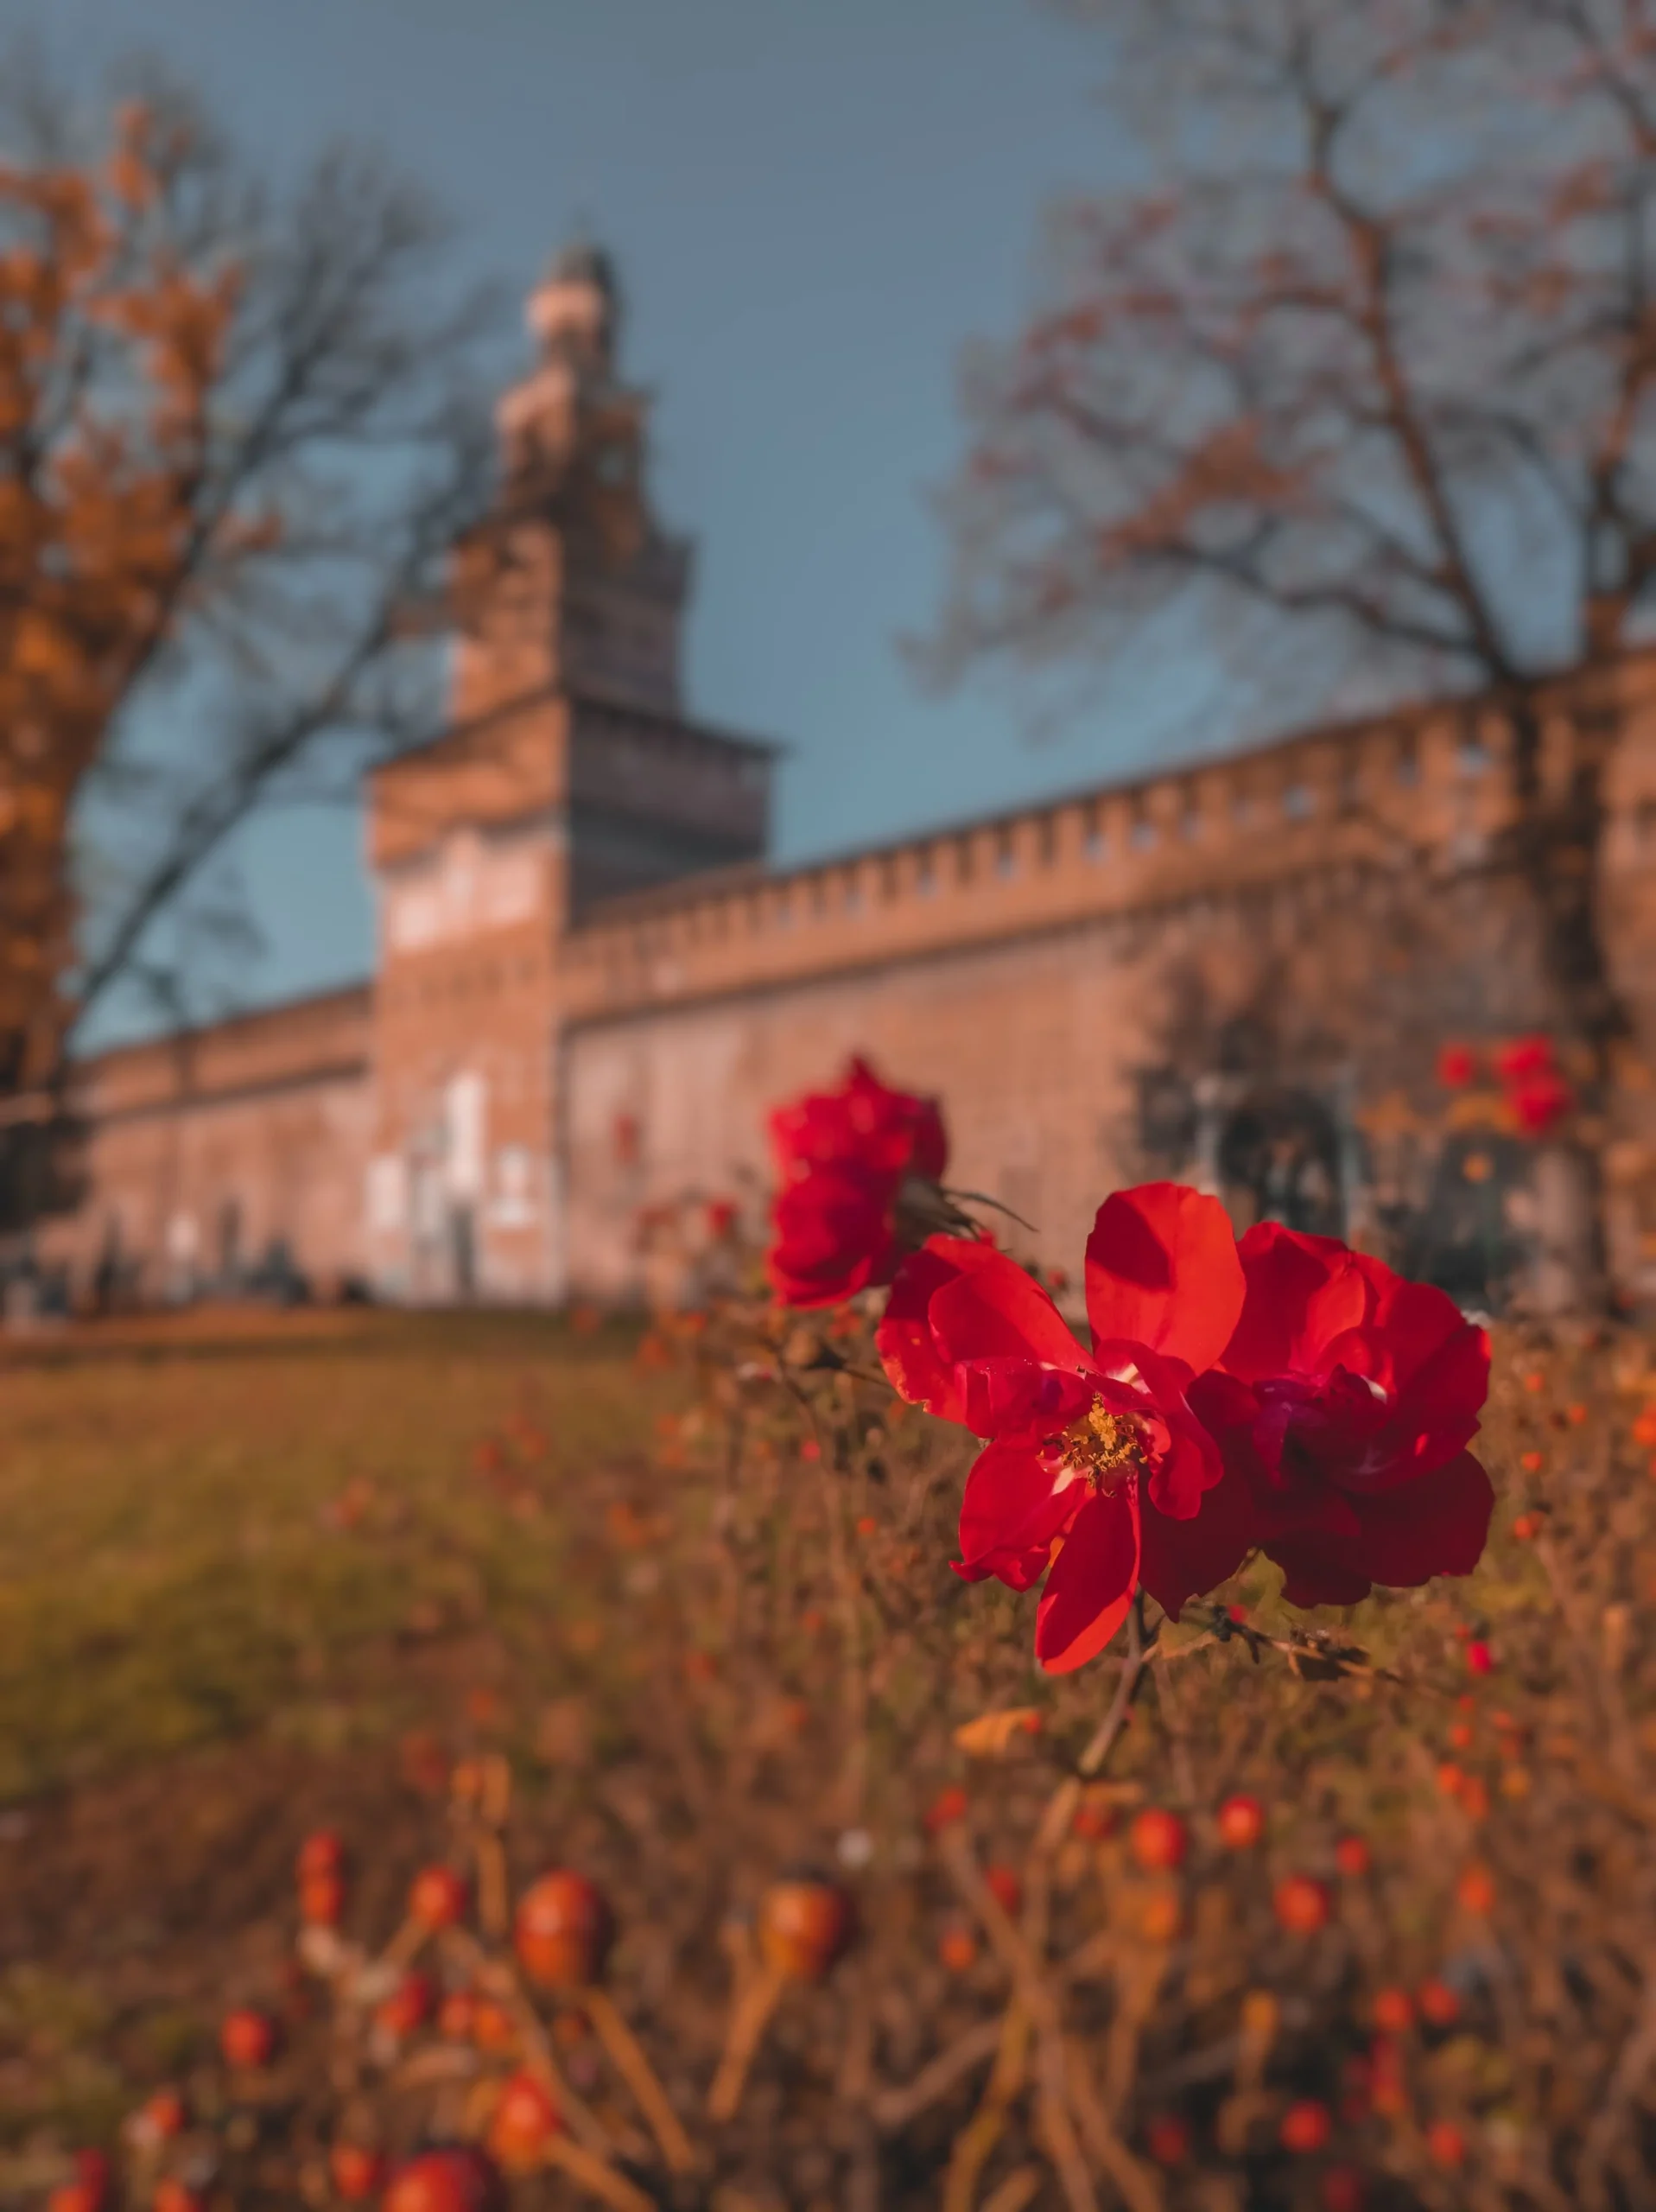 A red flower in a meadow, and in the background, Milan's Castello Sforzesco